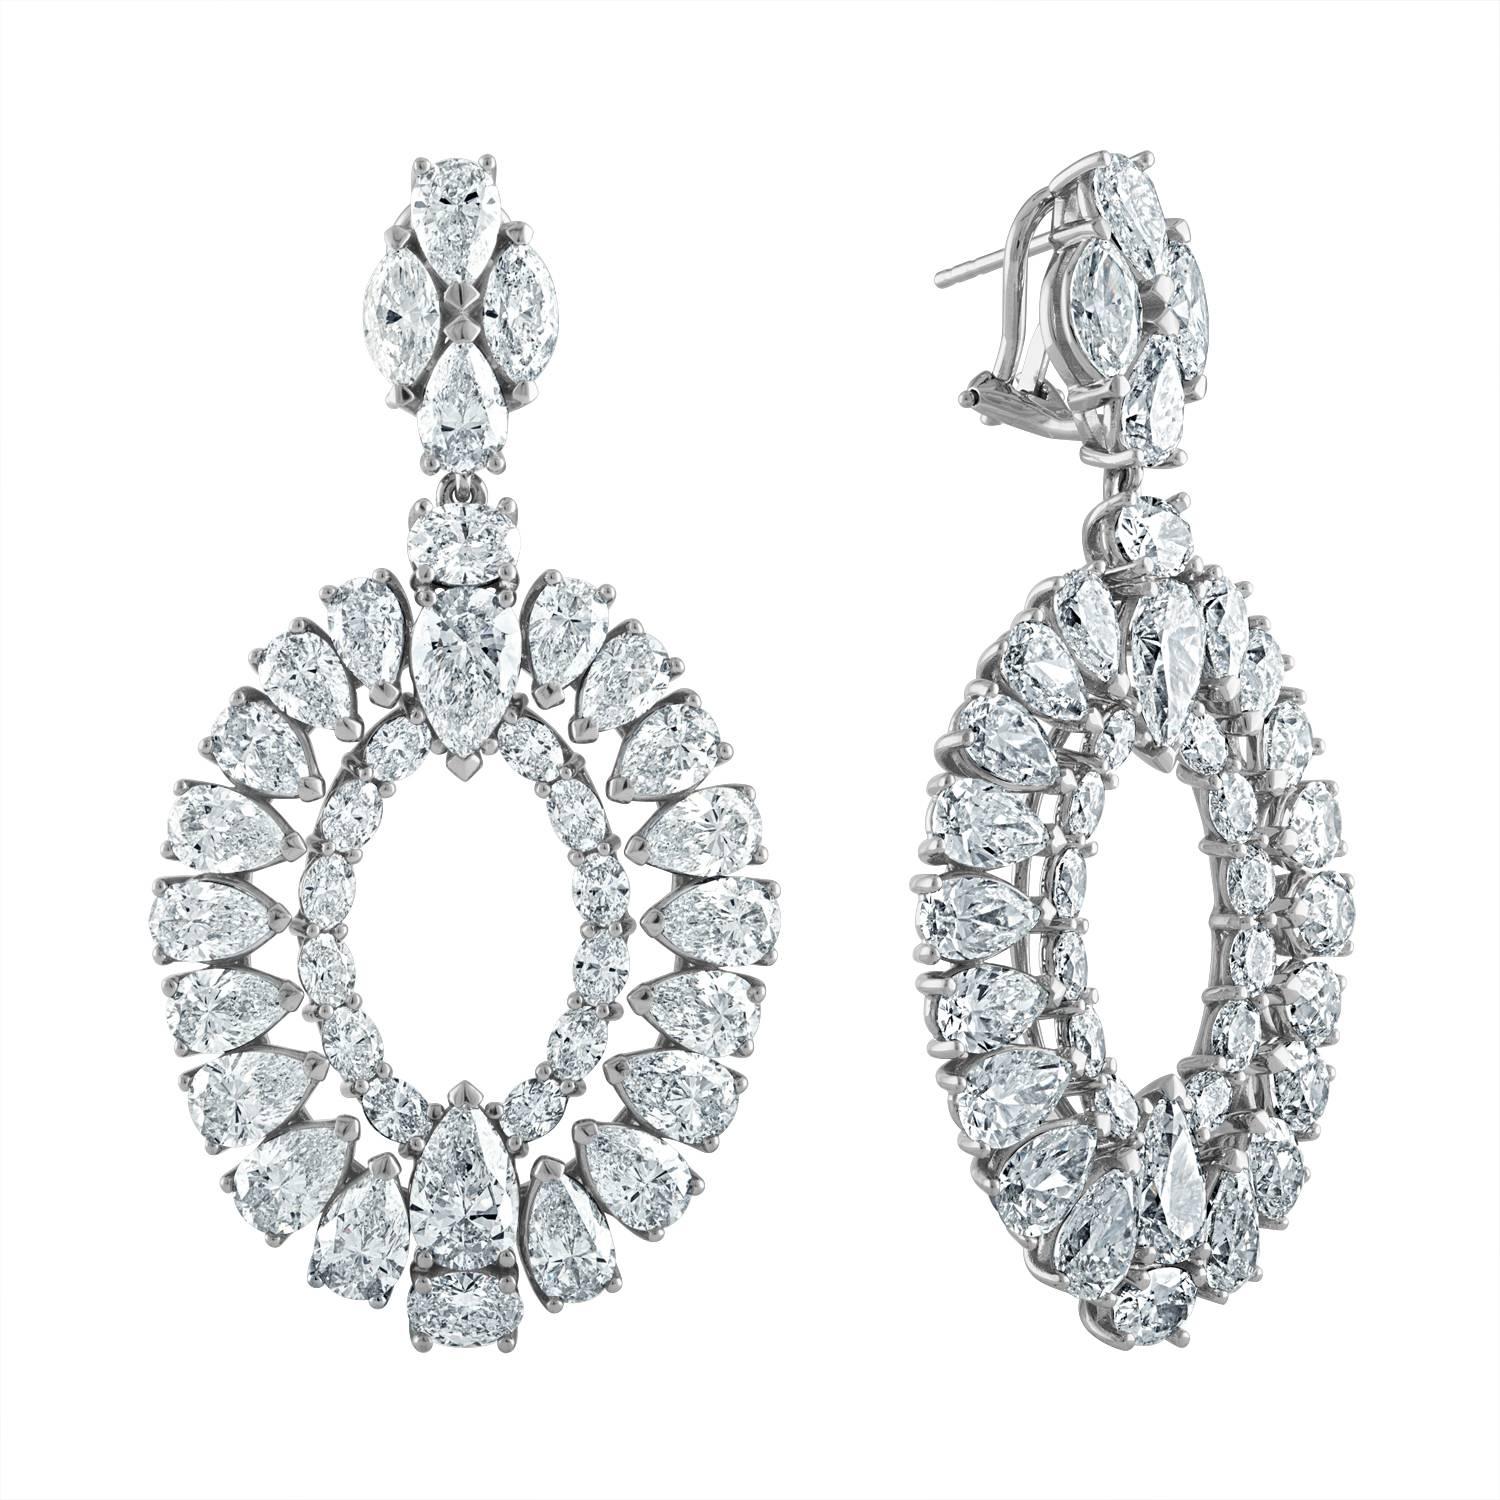 Contemporary Platinum Earrings with 31.27 Carat of Fancy Shapes Diamonds